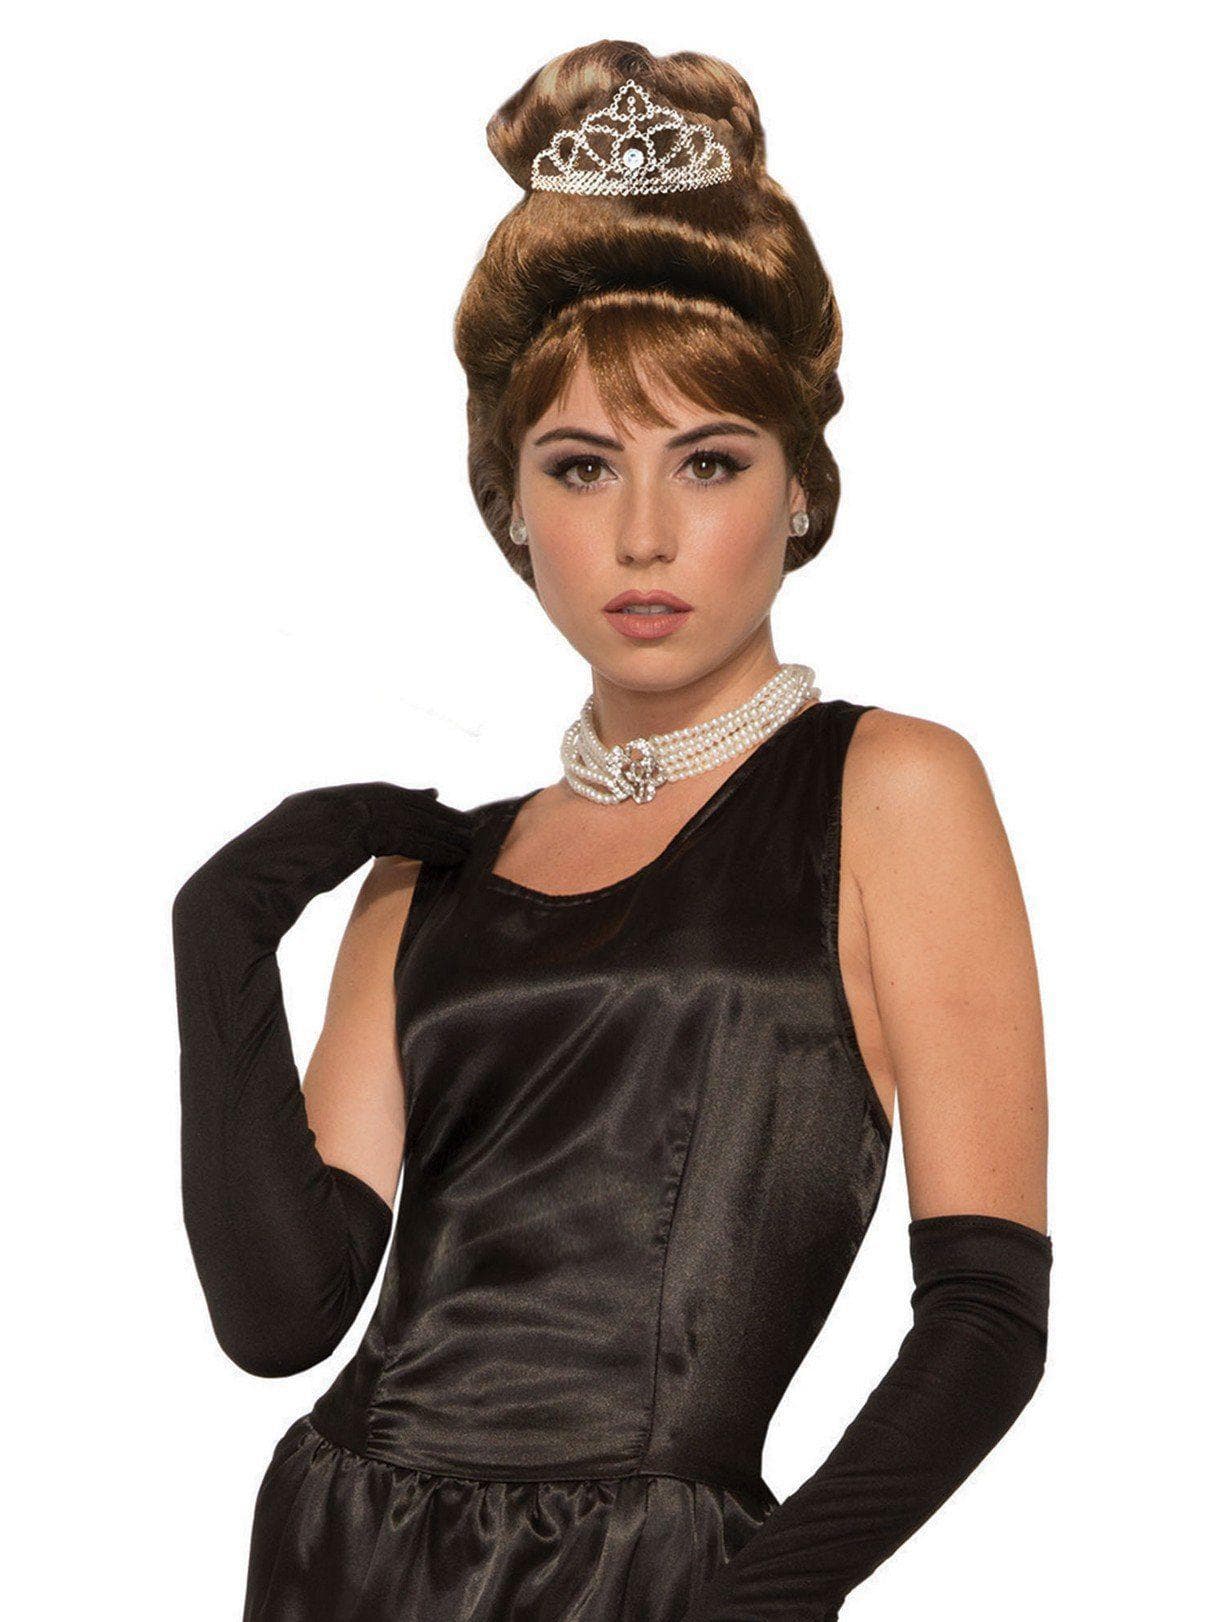 Women's Brown Holly Golightly Wig with Tiara - costumes.com